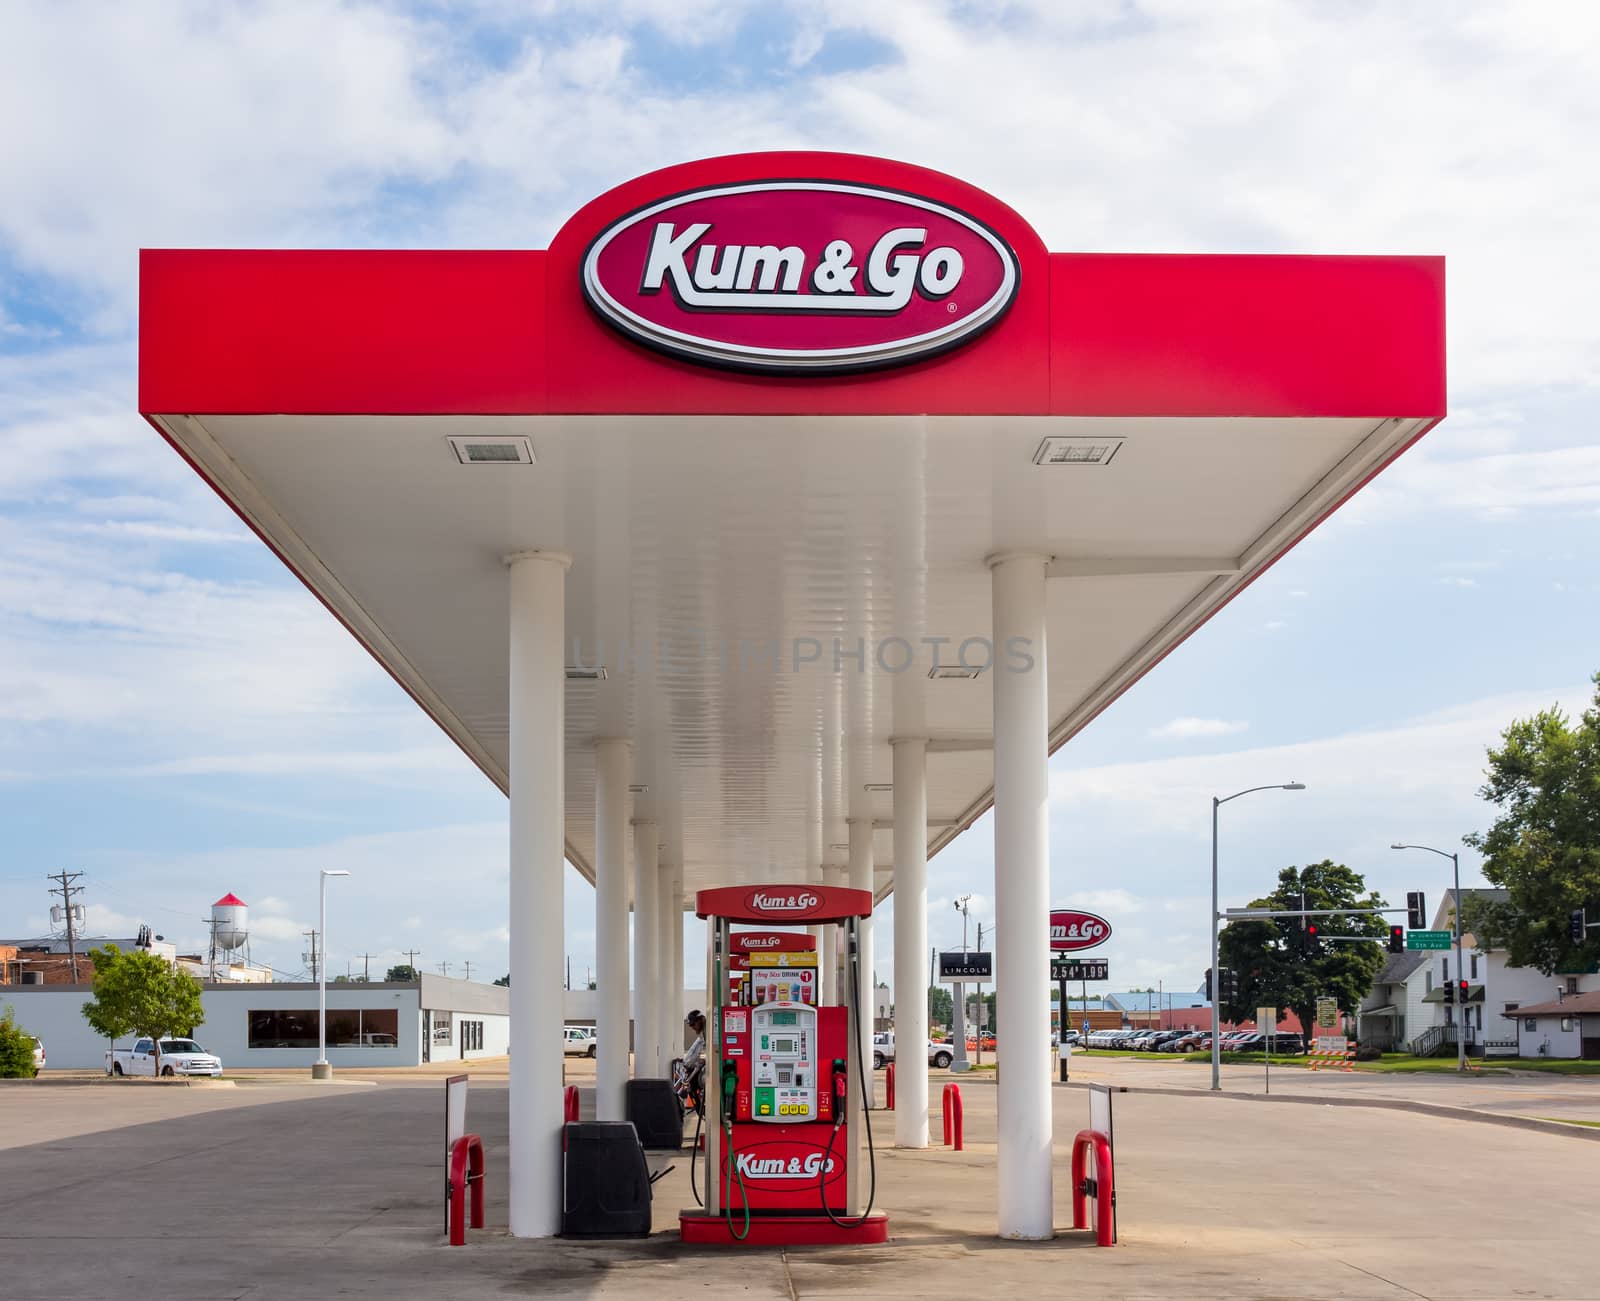 GRINNELL, IA/USA - AUGUST 8, 2015: Kum & Go store exterior and sign. Kum & Go, Inc., is a chain of convenience stores in the United States.